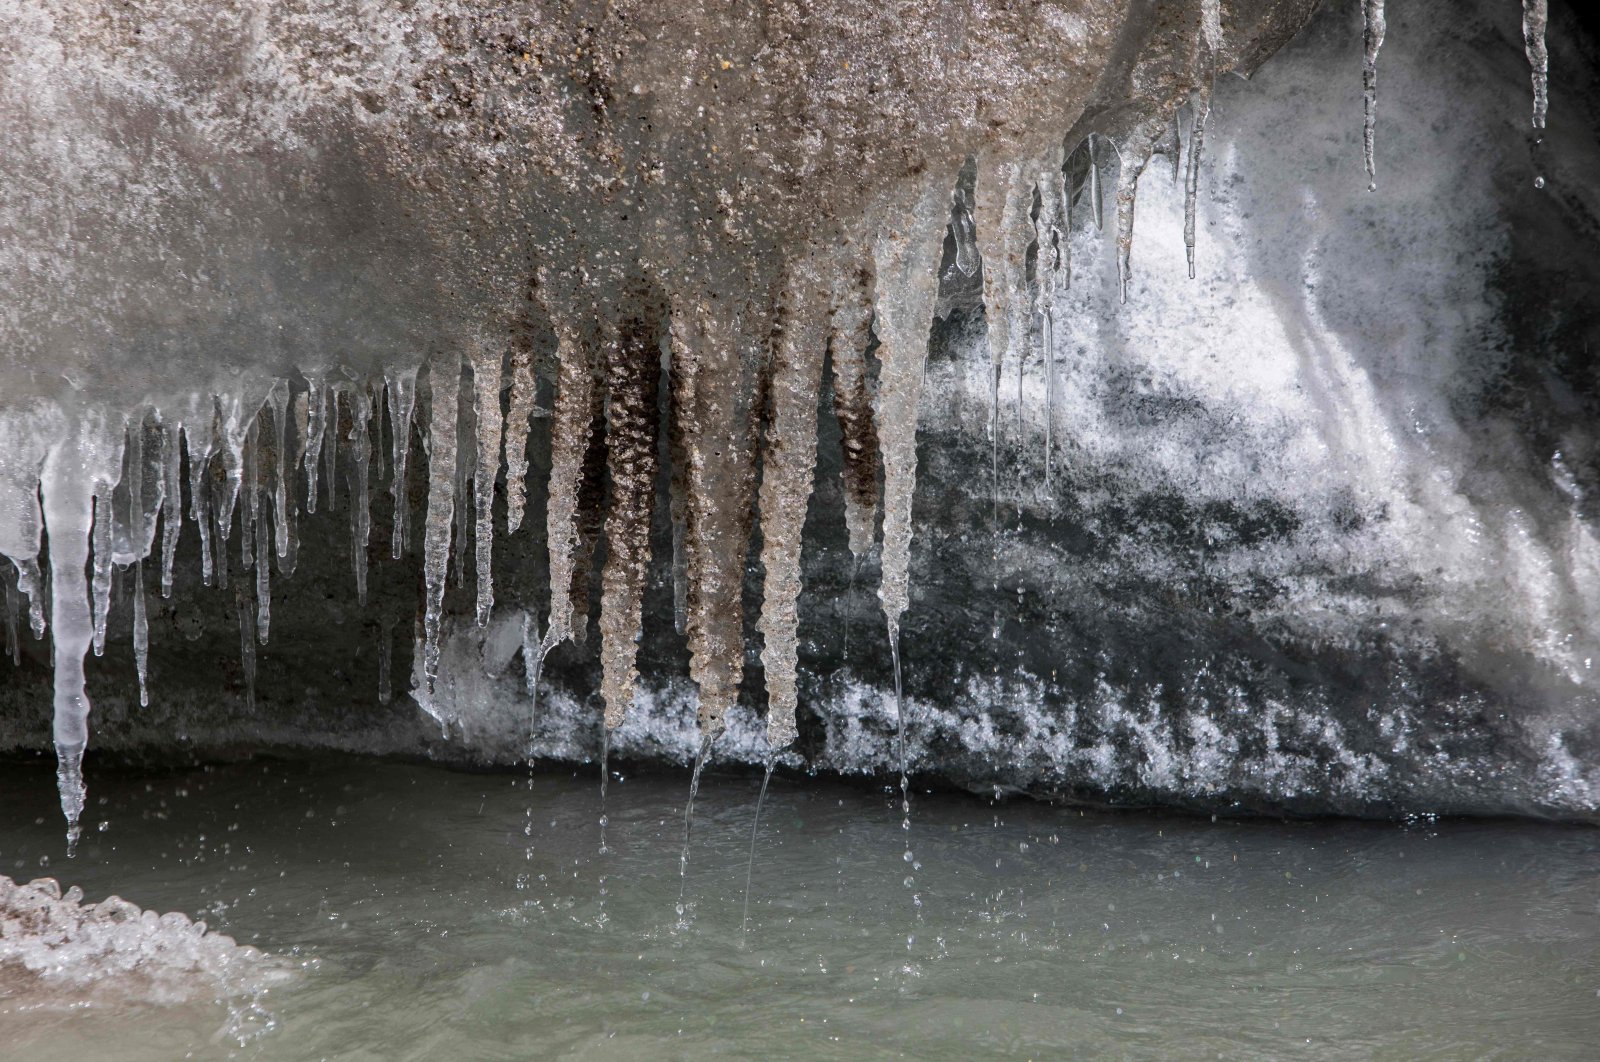 Ice melts from the Gangotri glacier, which is believed to be the source of the Ganges River, at Gangotri National Park, India, Oct. 19, 2022. (AFP Photo)